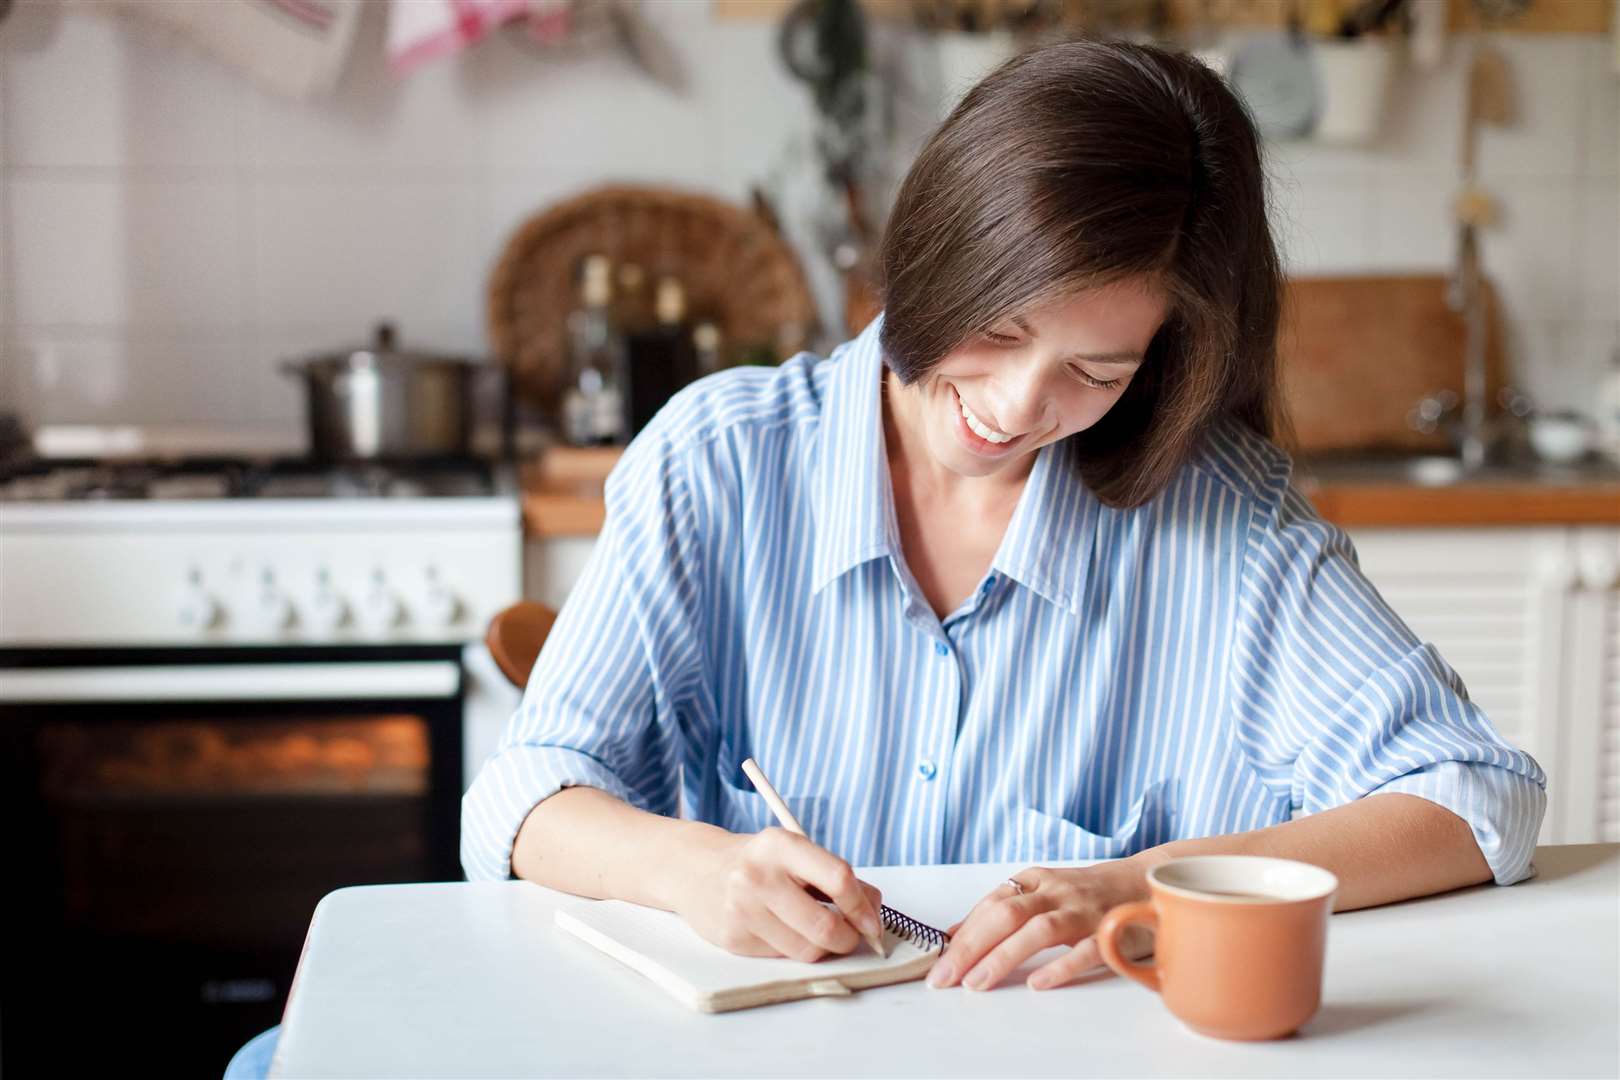 Do you meal plan and work from a list? Photo: PA/iStock.